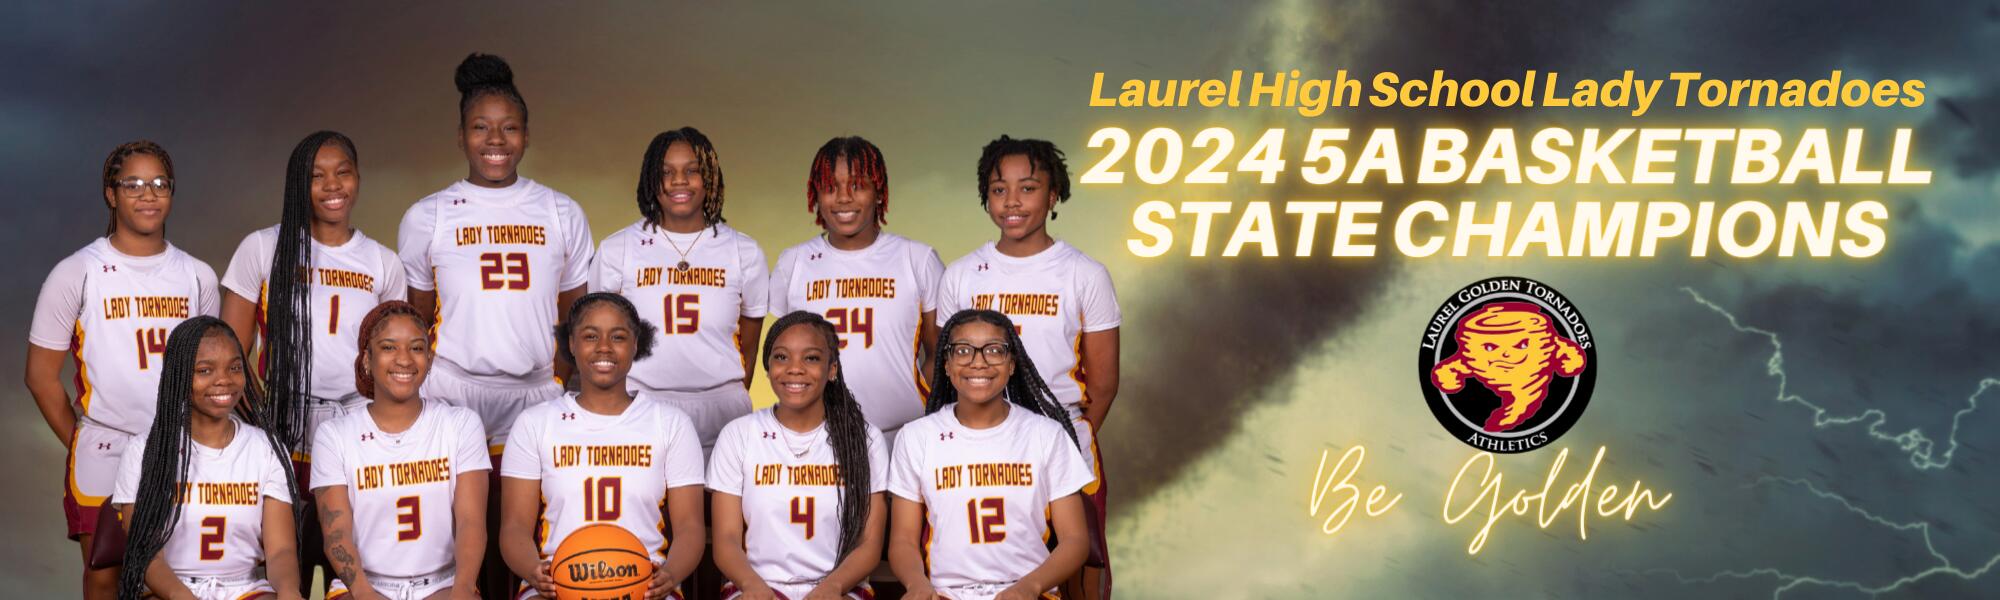 Laurel High School Lady Tornadoes 2024 5A Basketball State Champions team wearing white and cardinal jerseys 